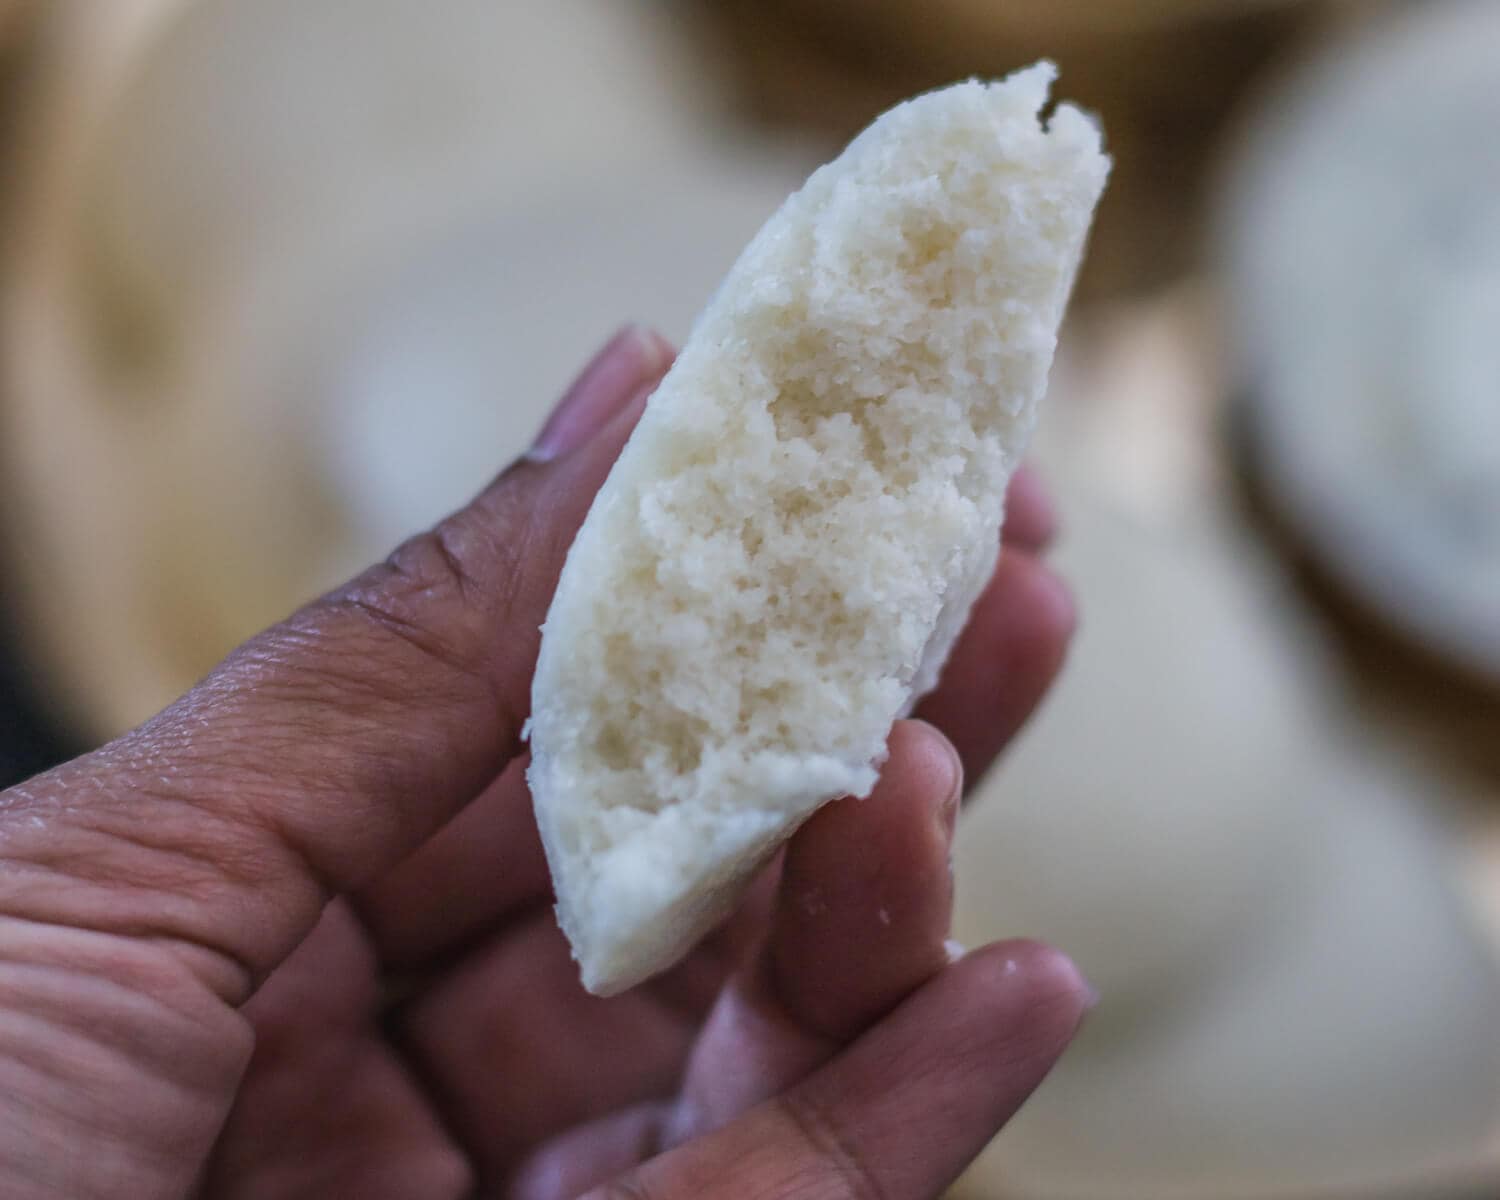 A hand holding a piece of idli